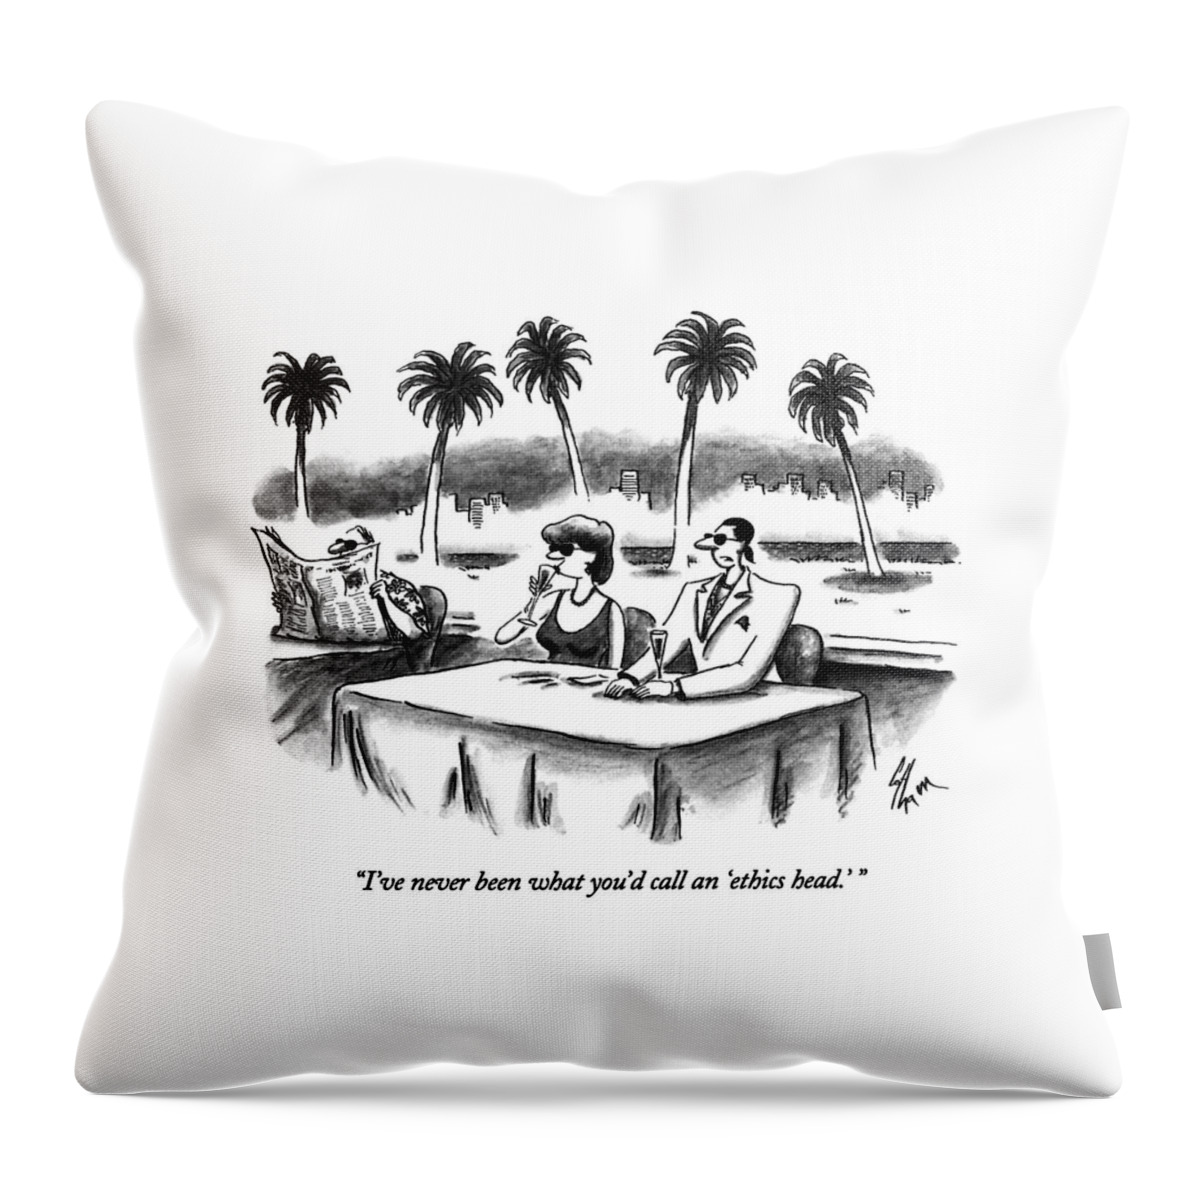 I've Never Been What You'd Call An 'ethics Head.' Throw Pillow